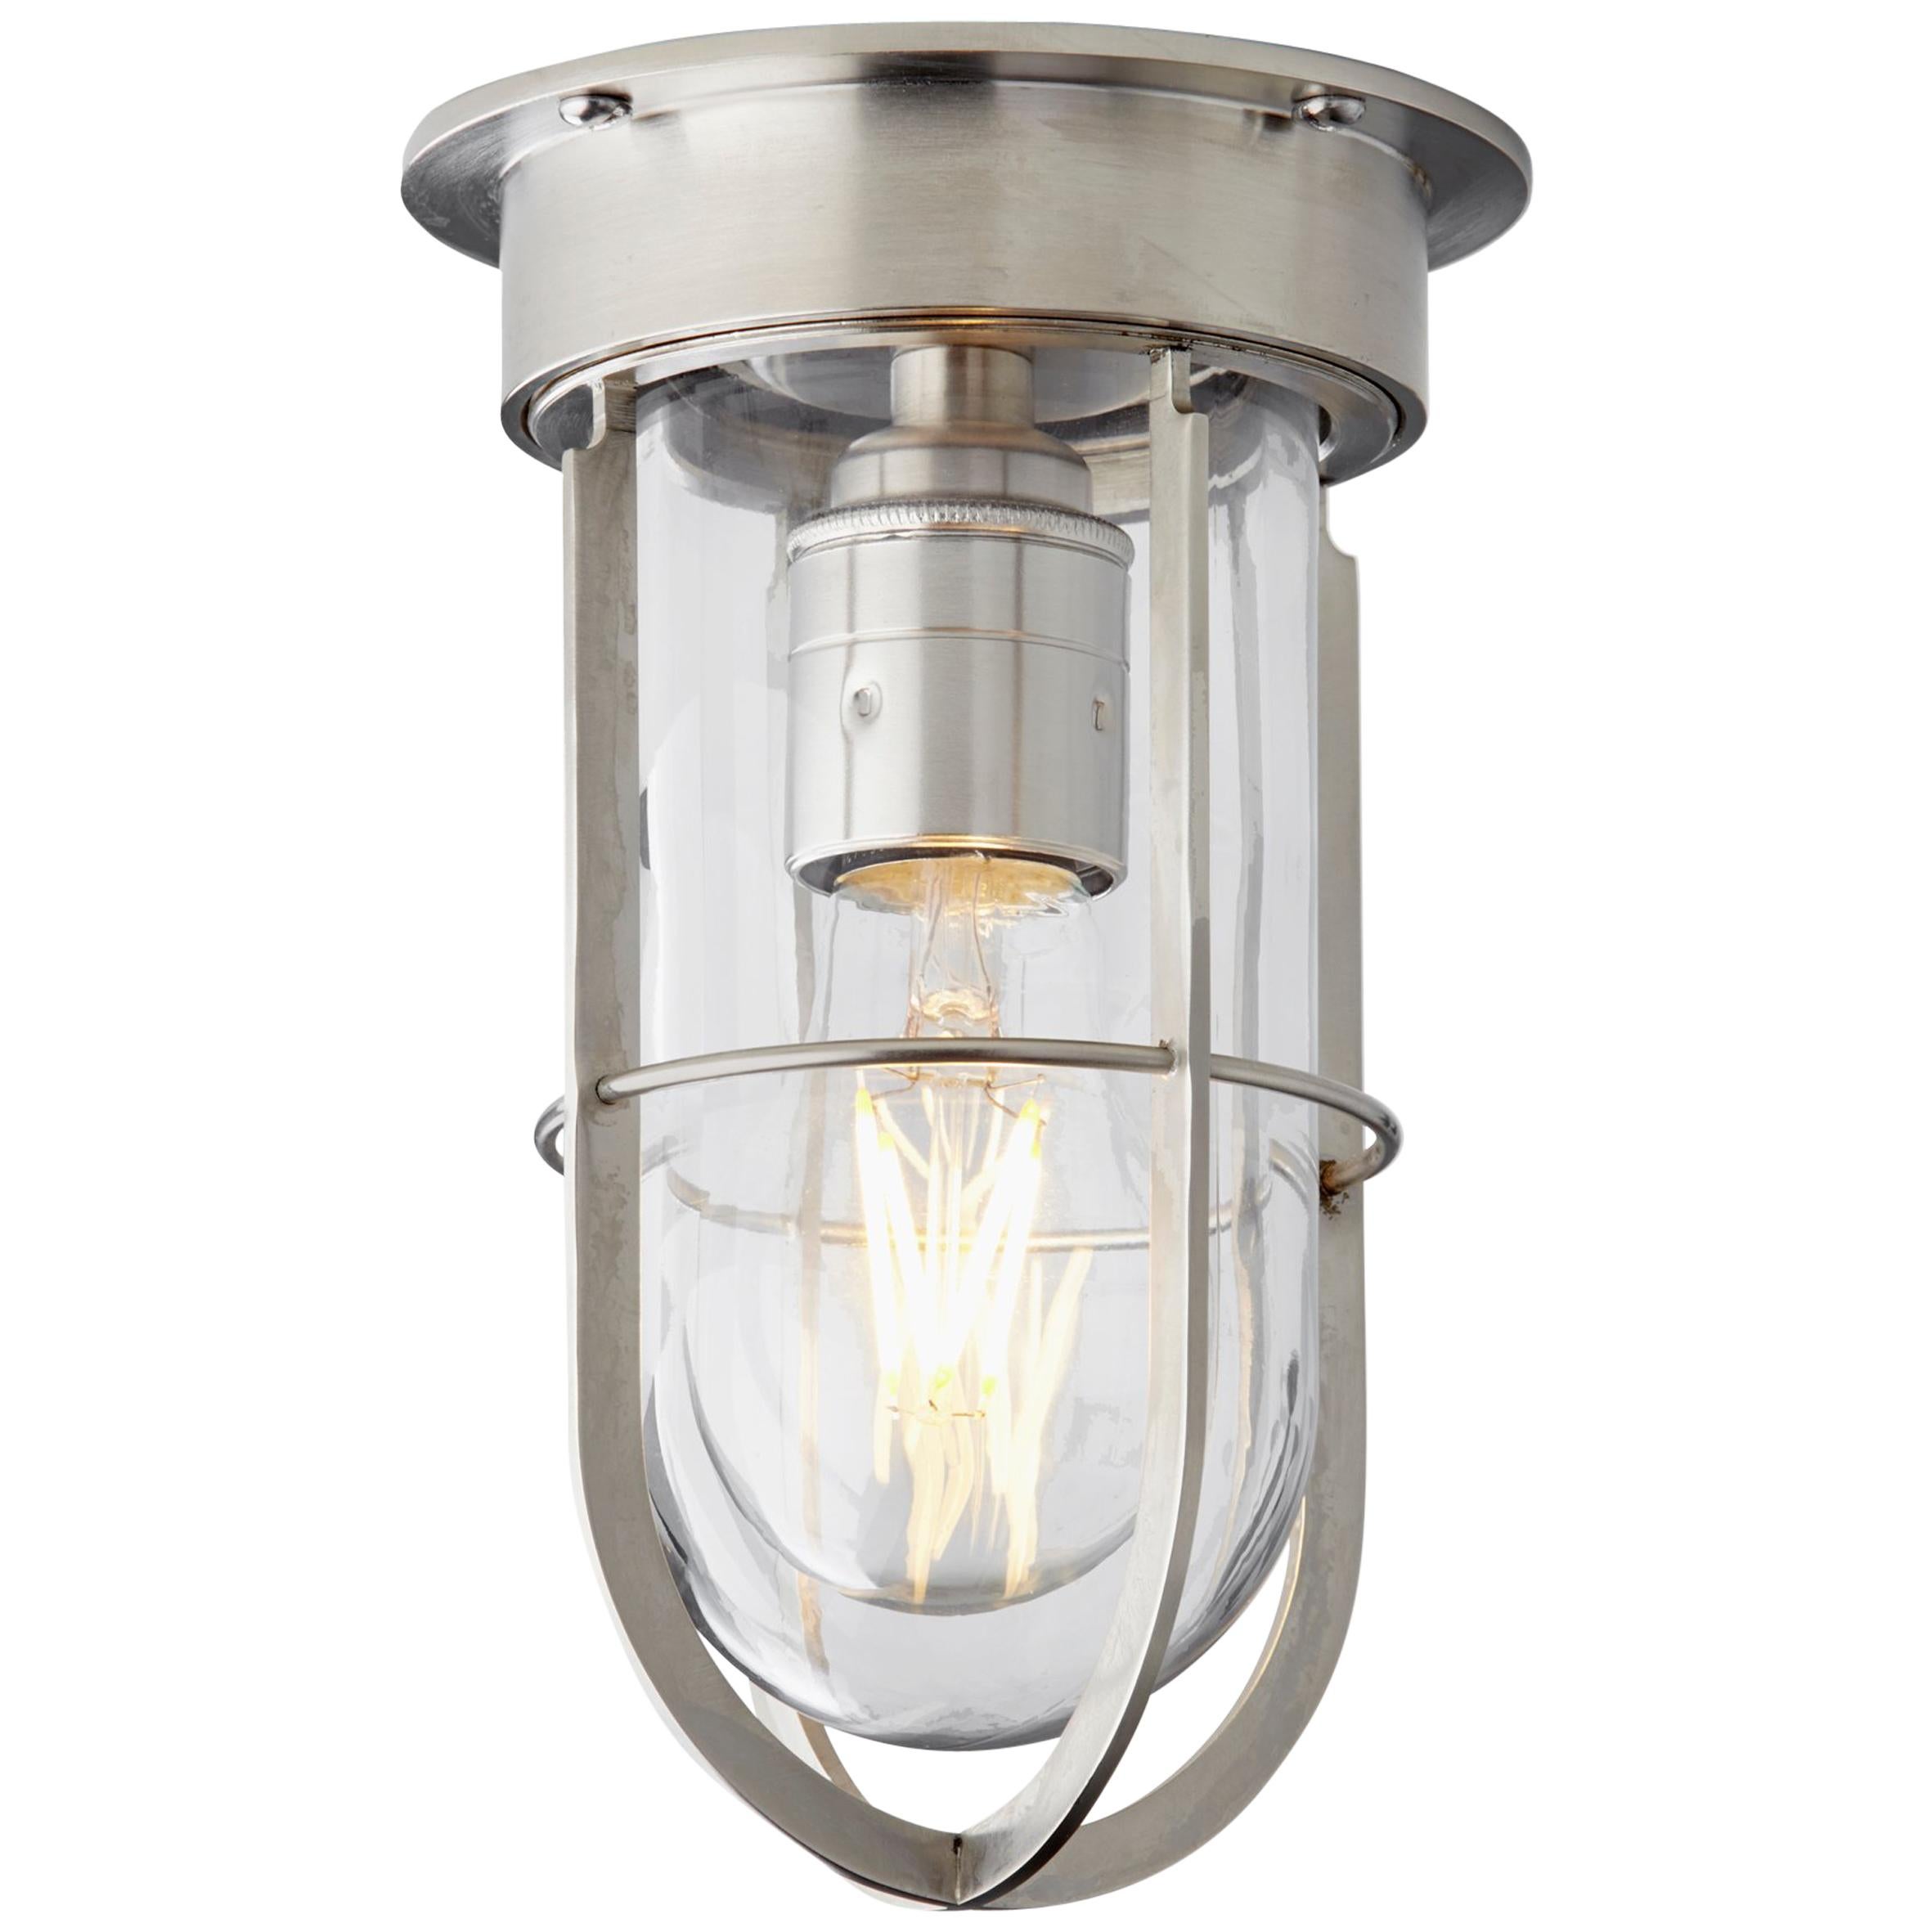 Tekna Docklight Ceiling Light with Brushed Nickel Finish and Clear Glass